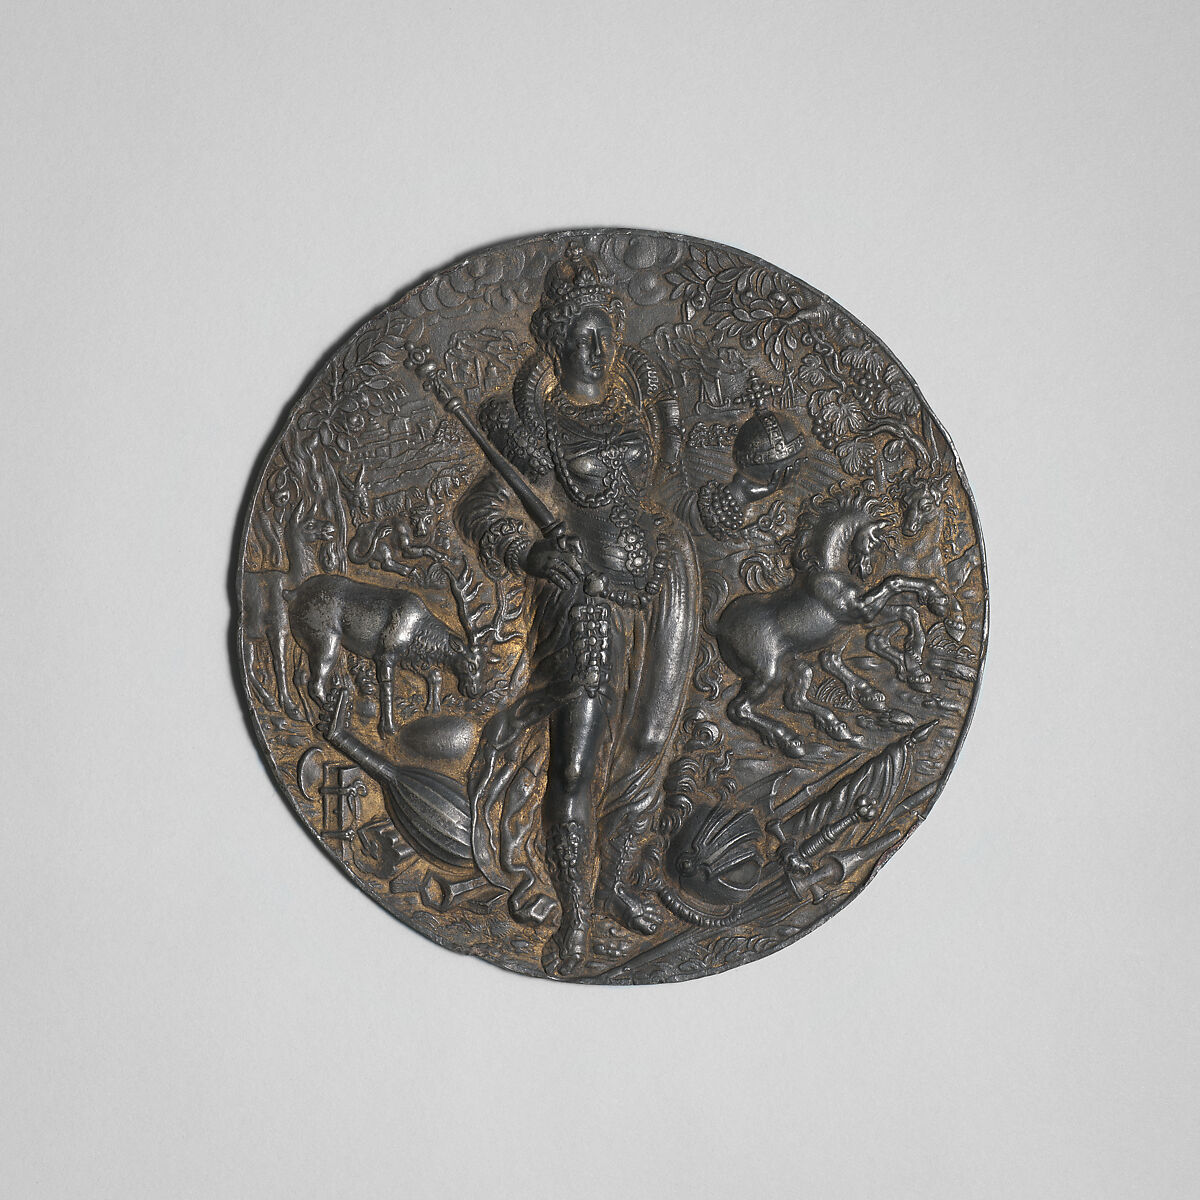 Personification of Europe, Lead, with traces of gilding, German